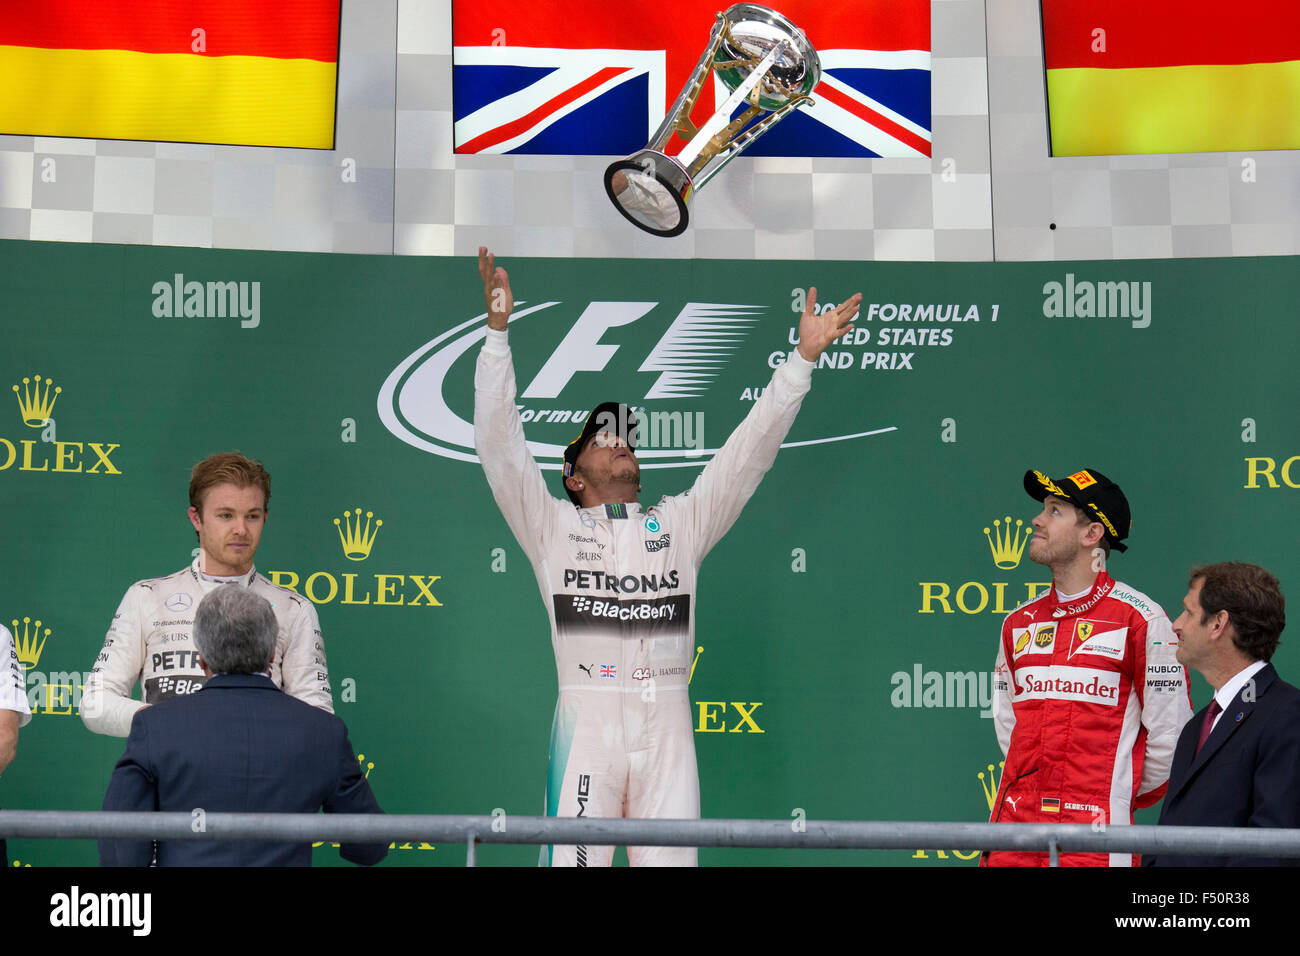 Austin, TX USA October 25, 2015: Formula 1 driver Lewis Hamilton celebrates his victory over teammate Nico Rosberg in the United States Grand Prix that clinched his world championship title. At left is Nico Rosberg in second place and at right is thrid place Sebastian Vettel. Stock Photo